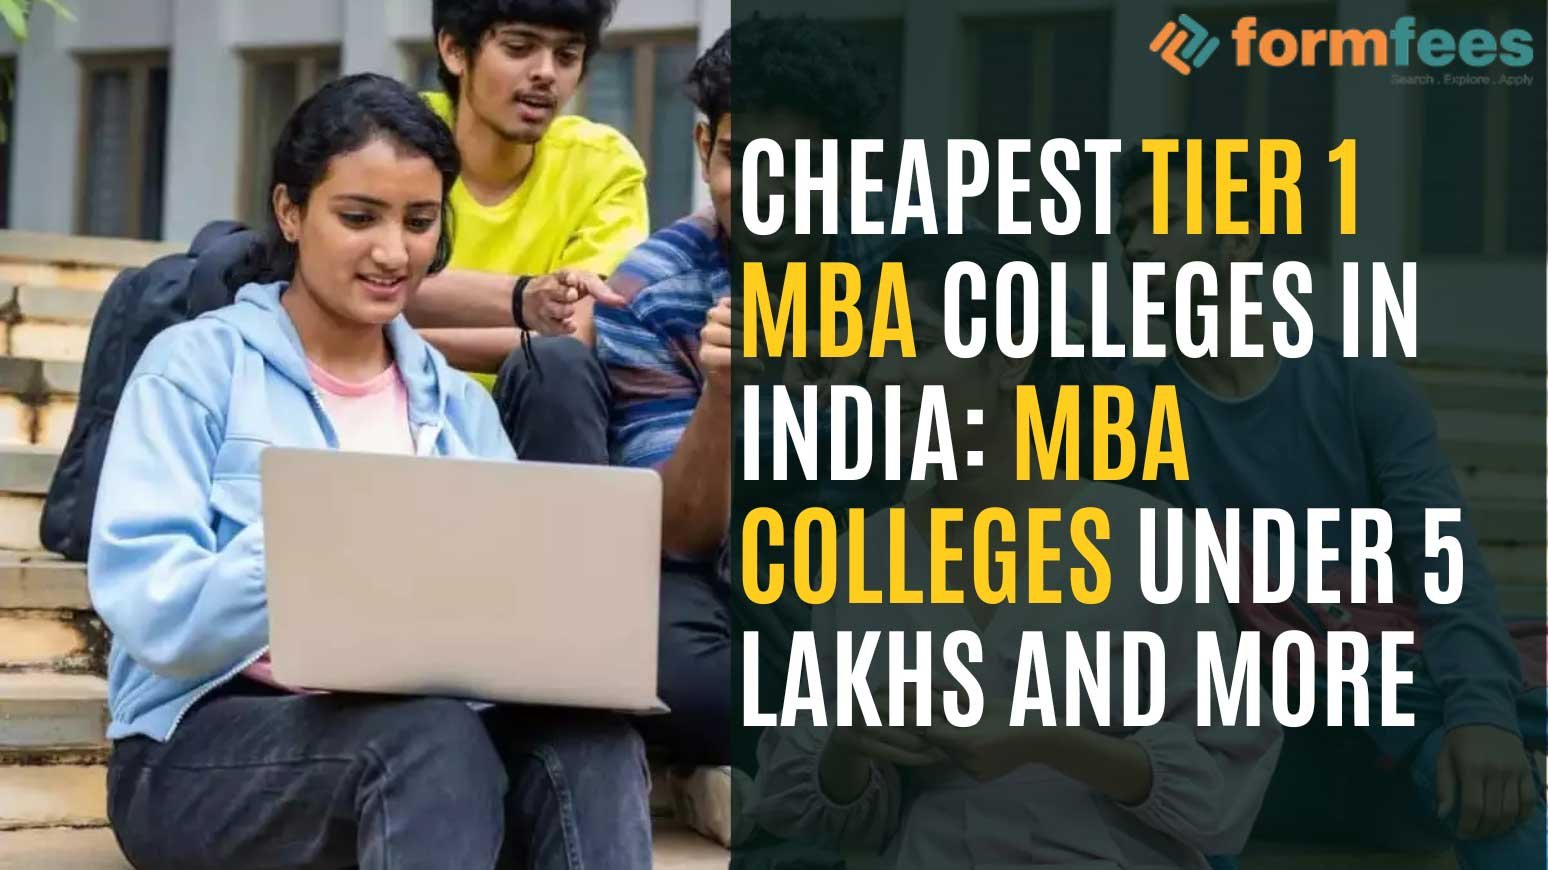 Cheapest Tier 1 MBA colleges in India: MBA Colleges under 5 Lakhs and more